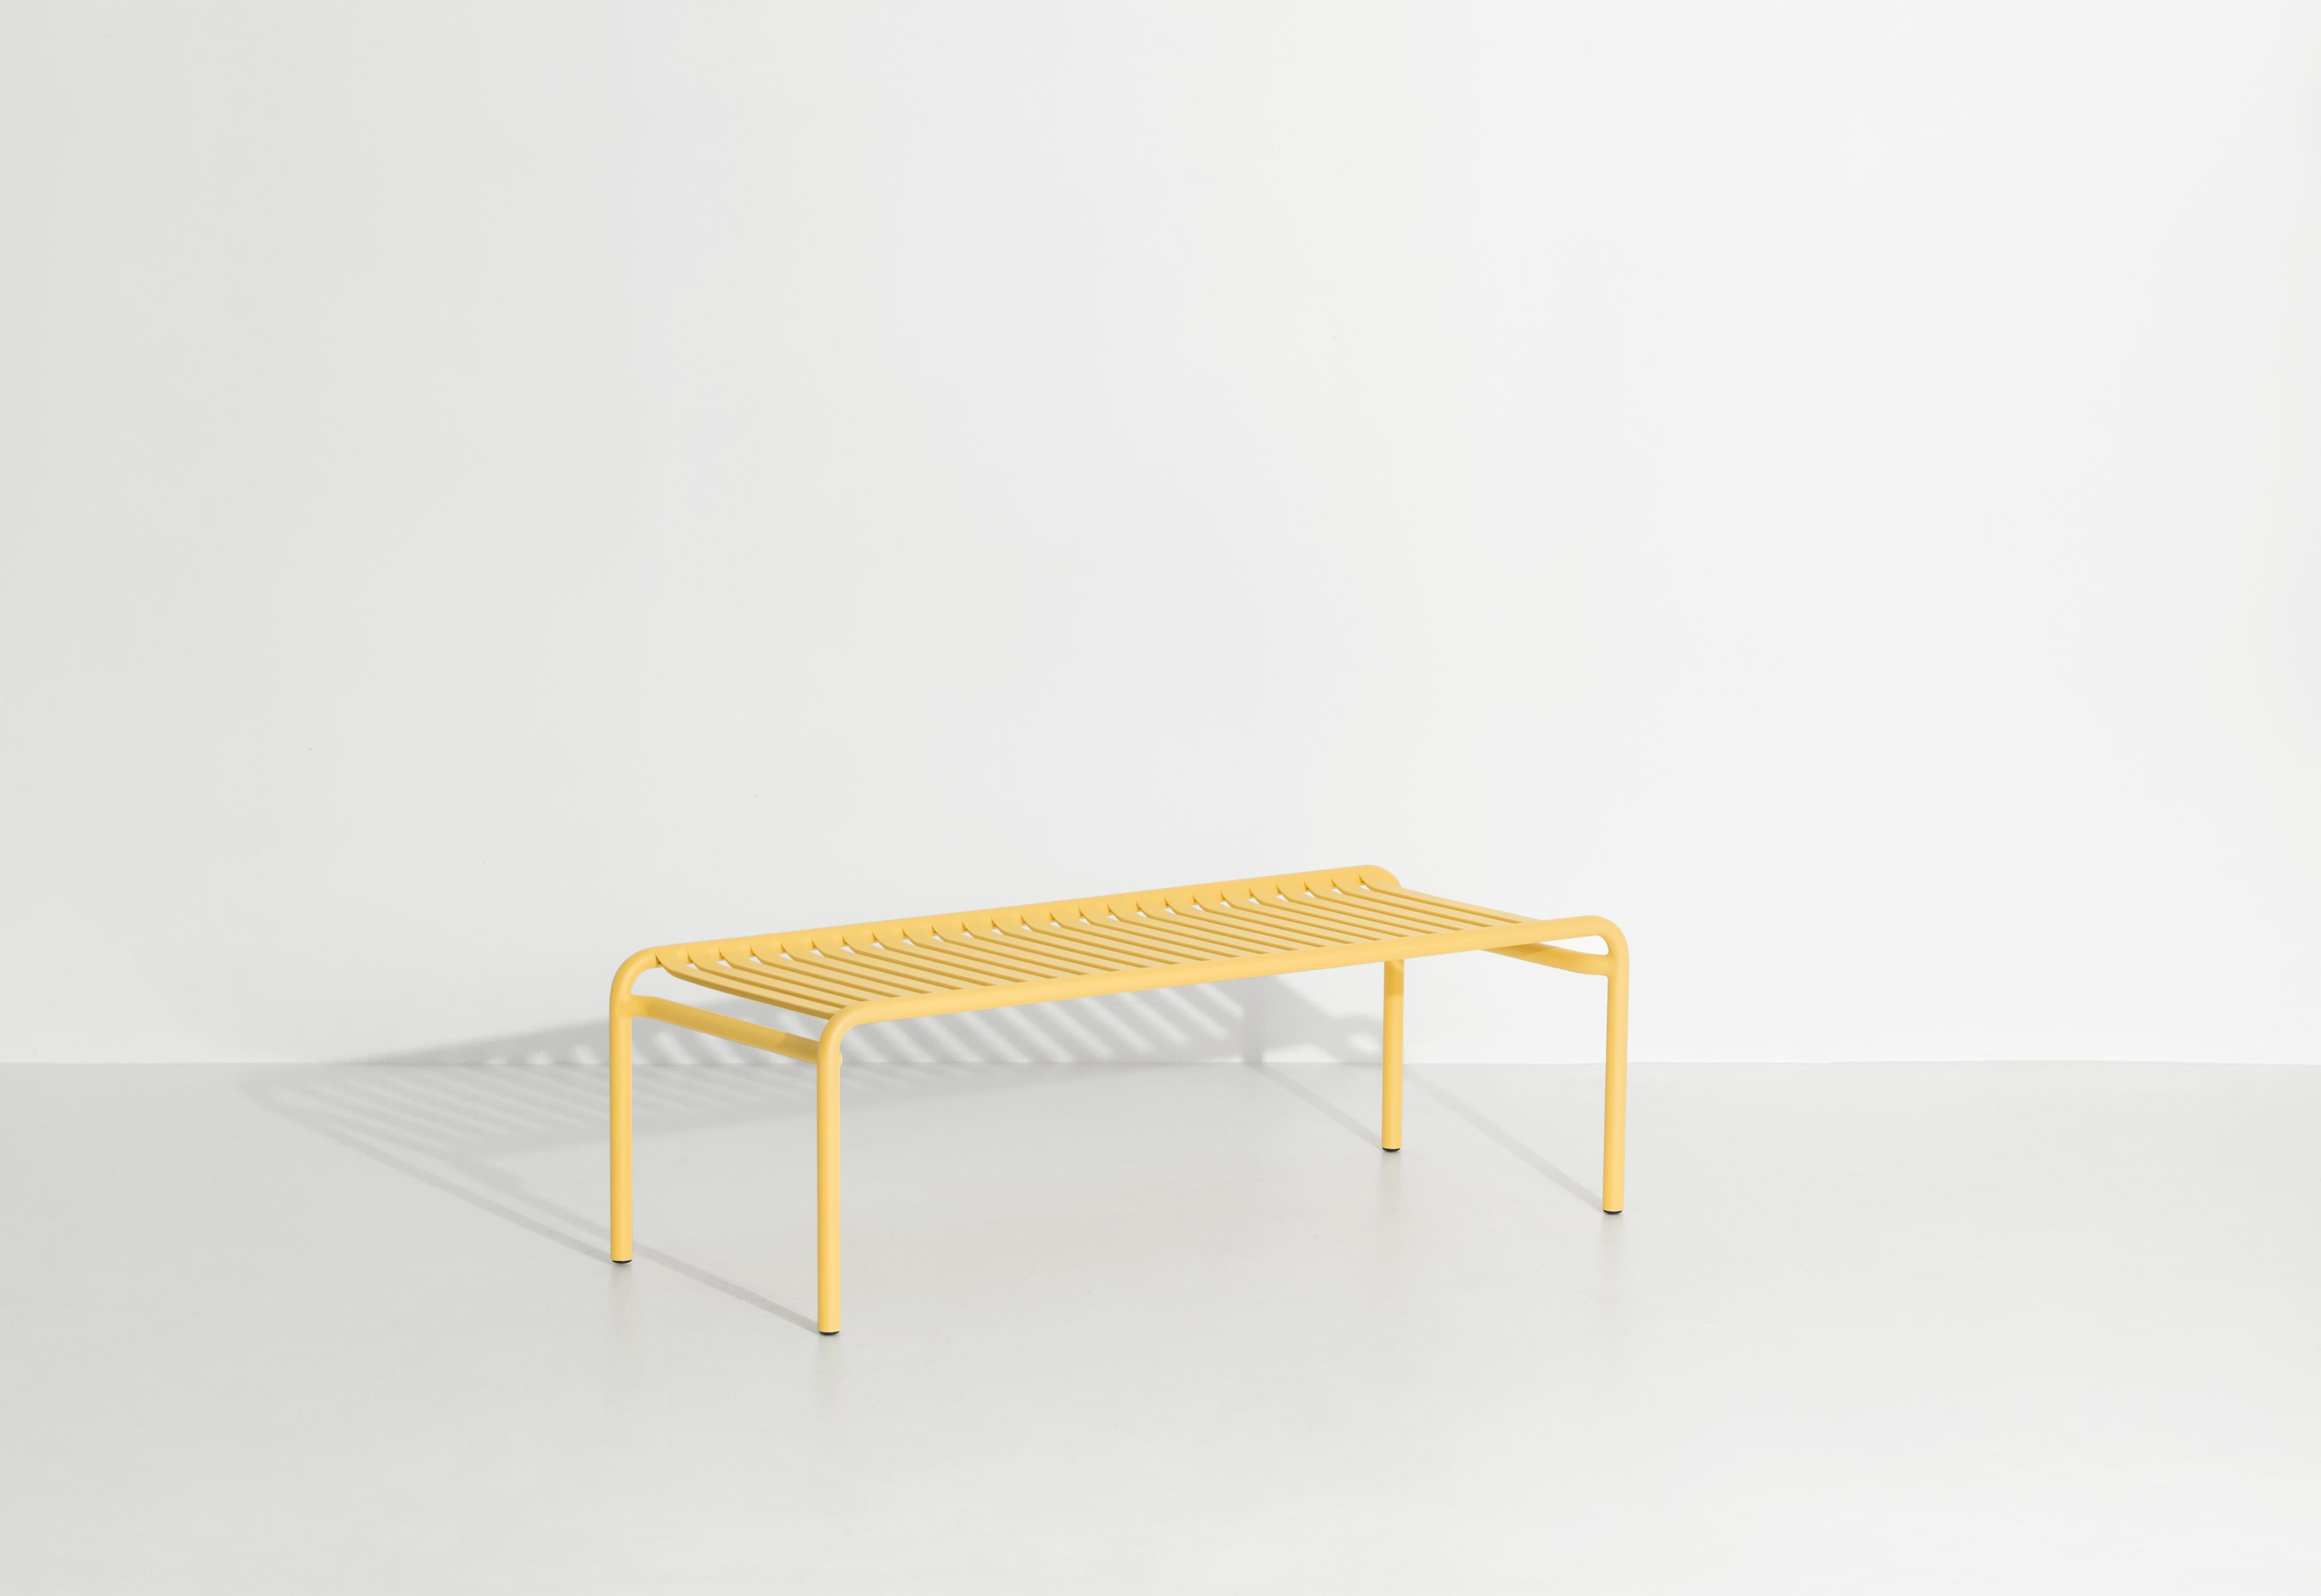 Petite Friture Week-End Long Coffee Table in Saffron Aluminium by Studio BrichetZiegler, 2017

The week-end collection is a full range of outdoor furniture, in aluminium grained epoxy paint, matt finish, that includes 18 functions and 8 colours